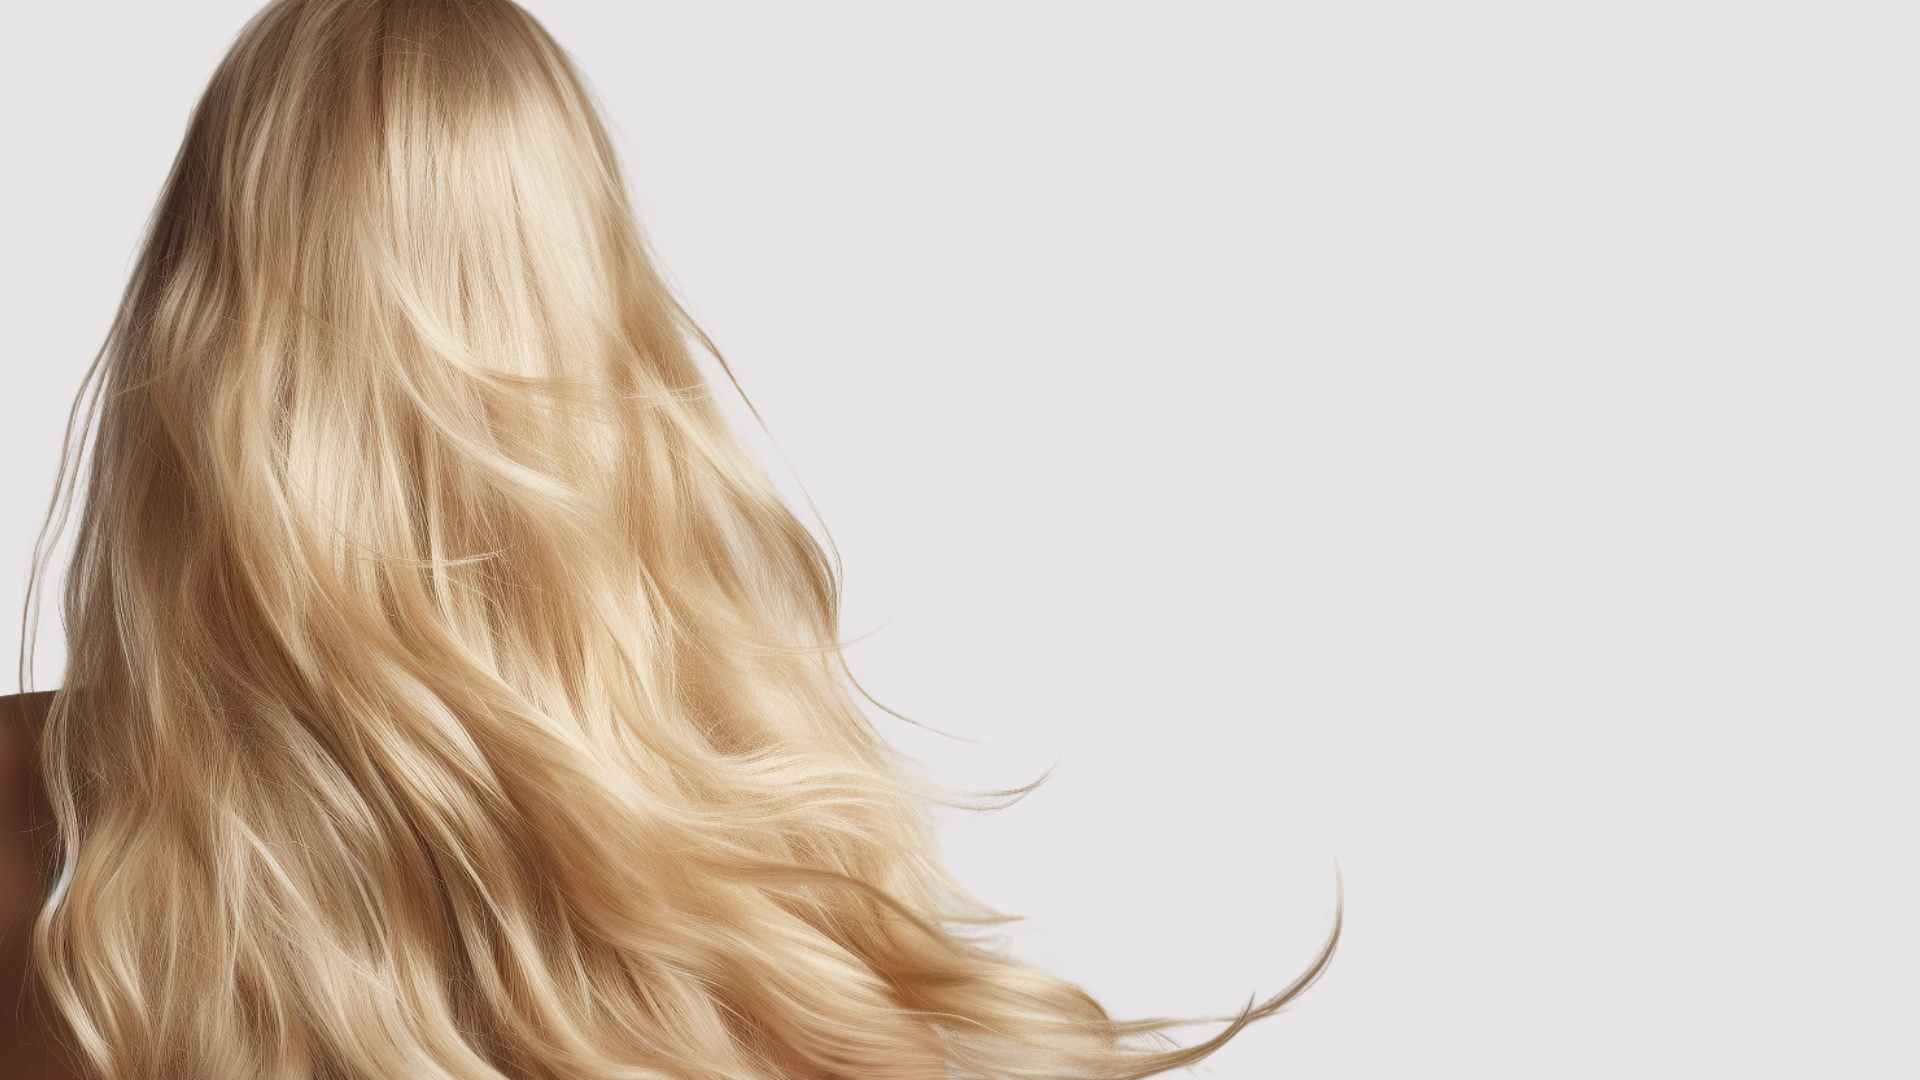 Split Ends: Female with long blonde hair, back to camera